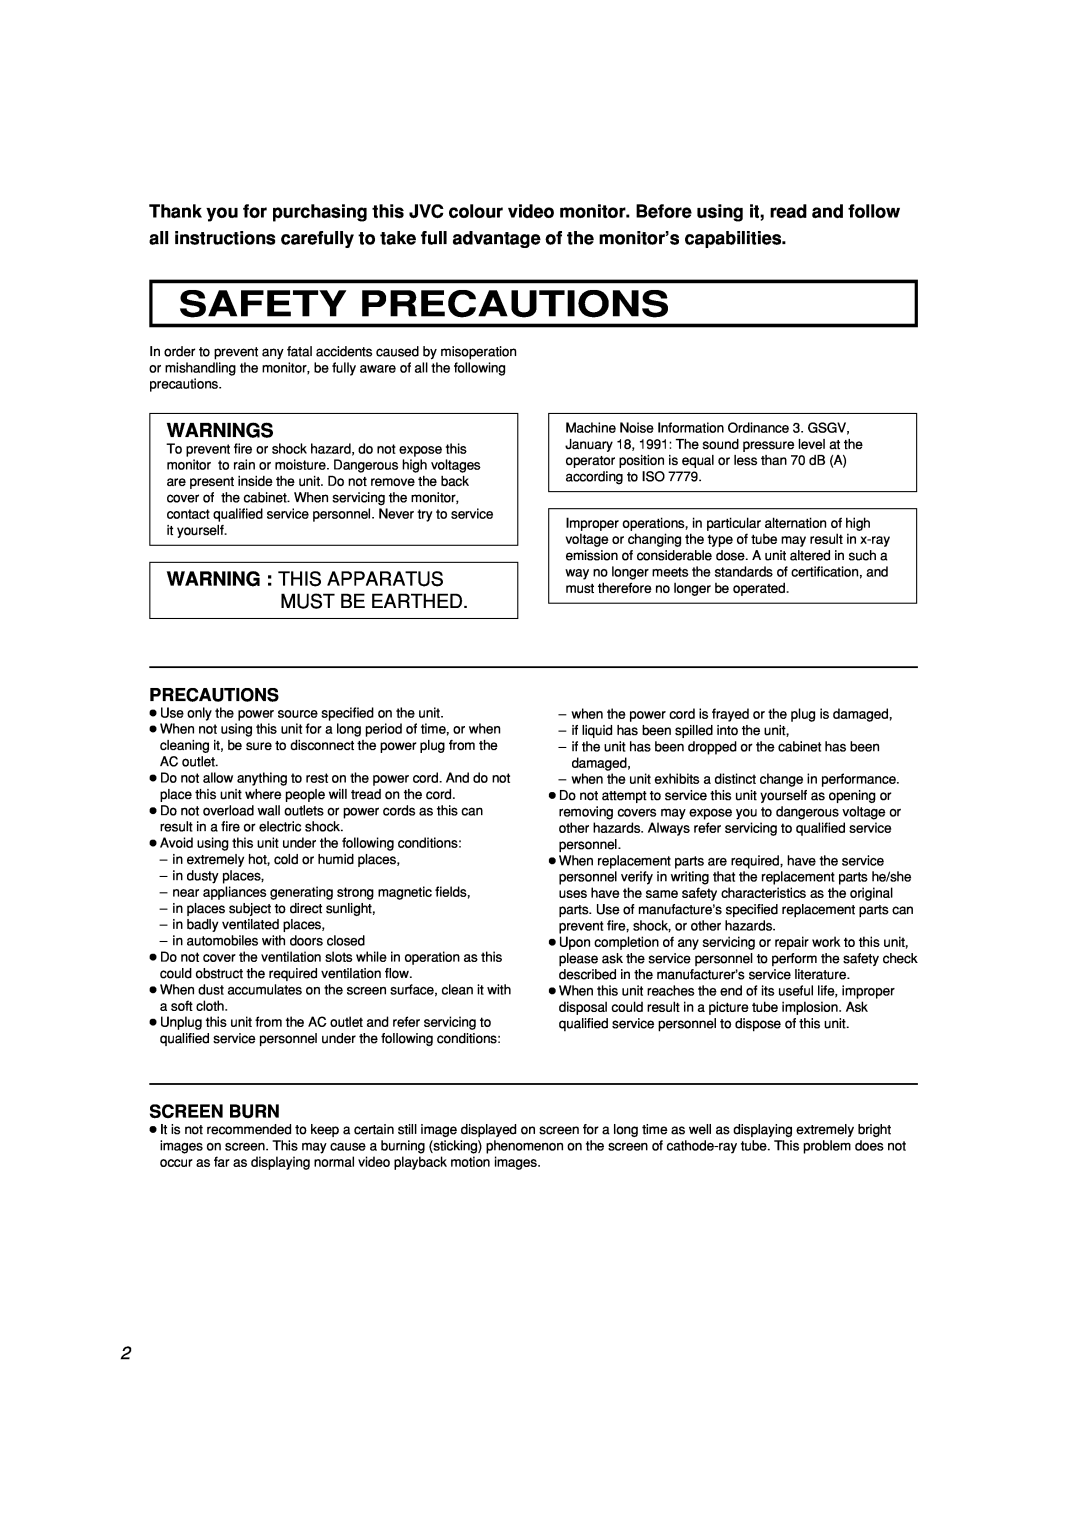 JVC LCT2142-001A-H manual Safety Precautions, Warnings, Screen Burn, Warning This Apparatus Must Be Earthed 